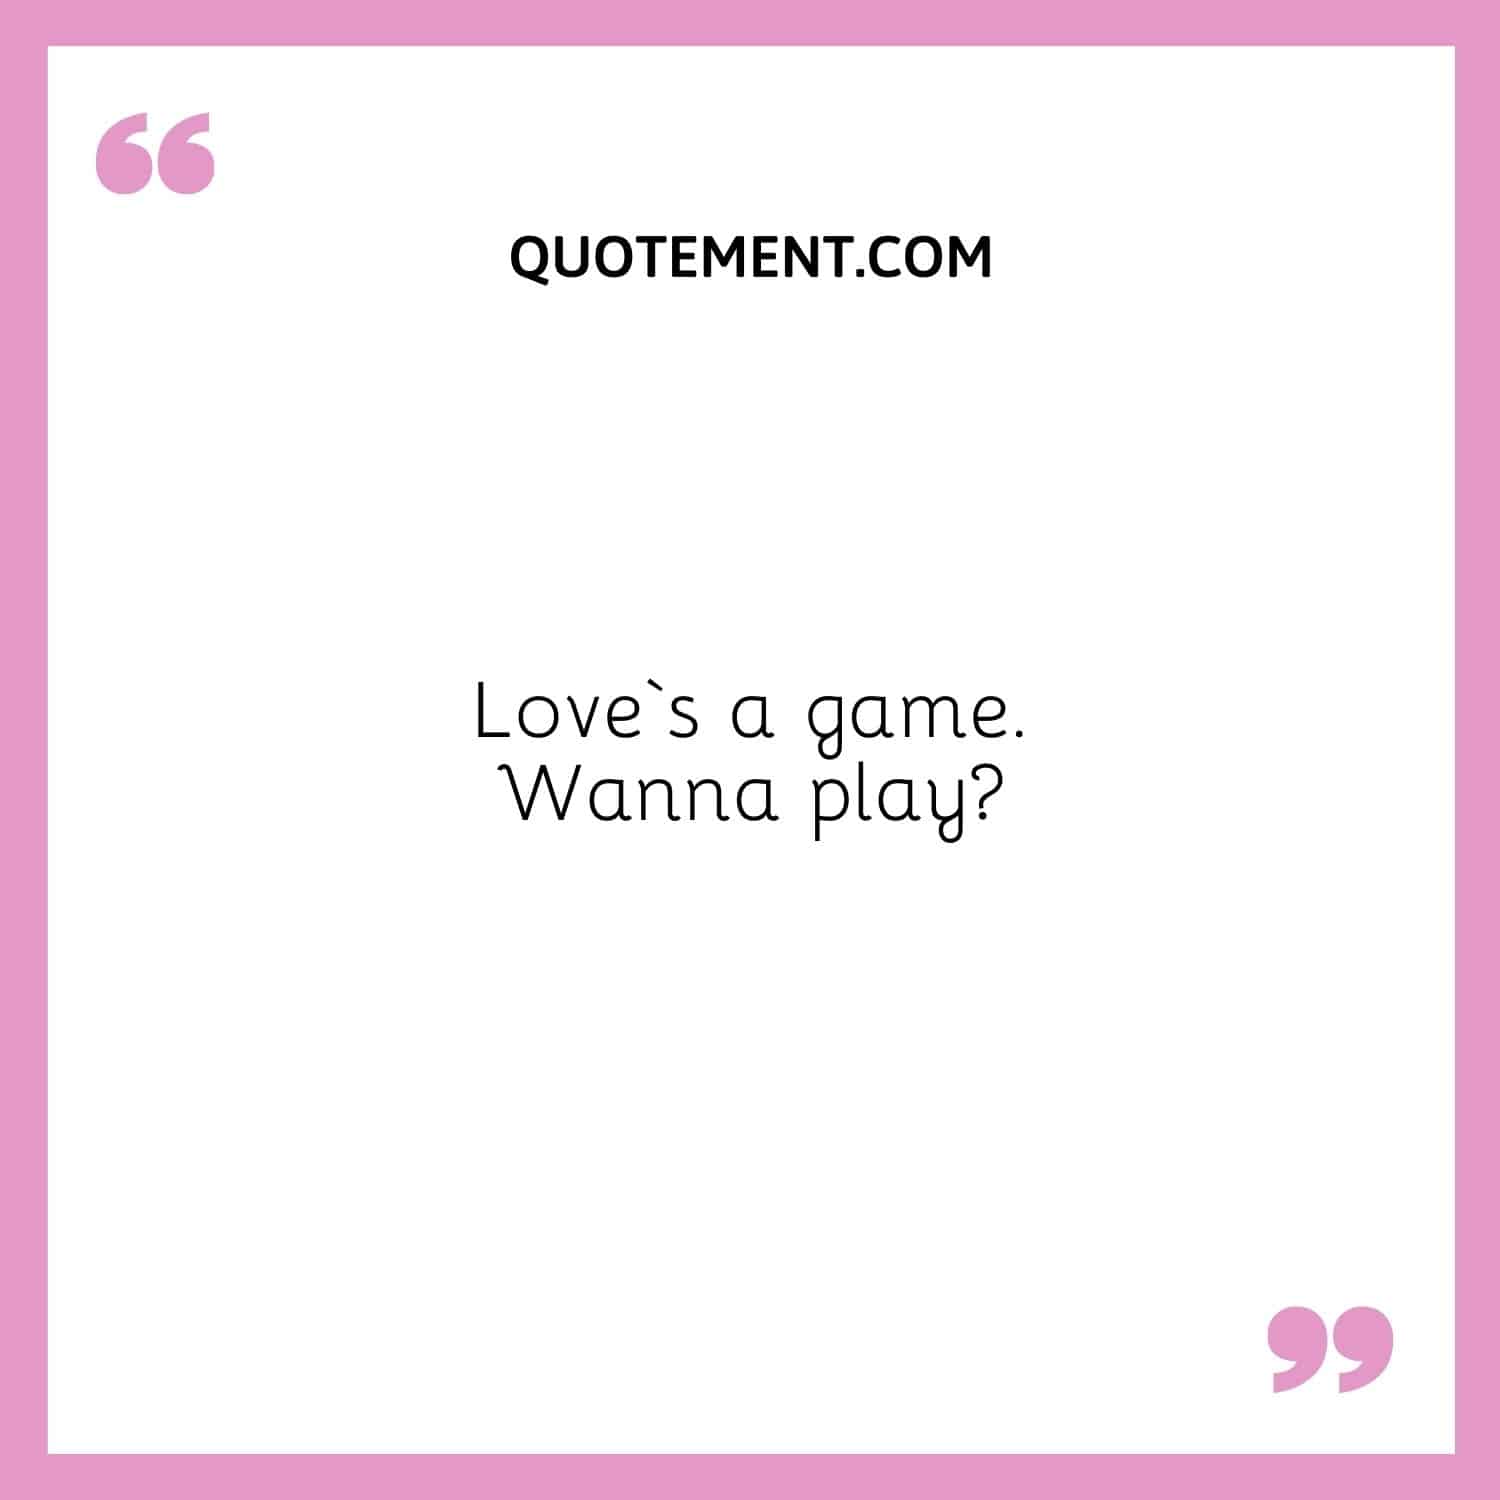 Love‘s a game